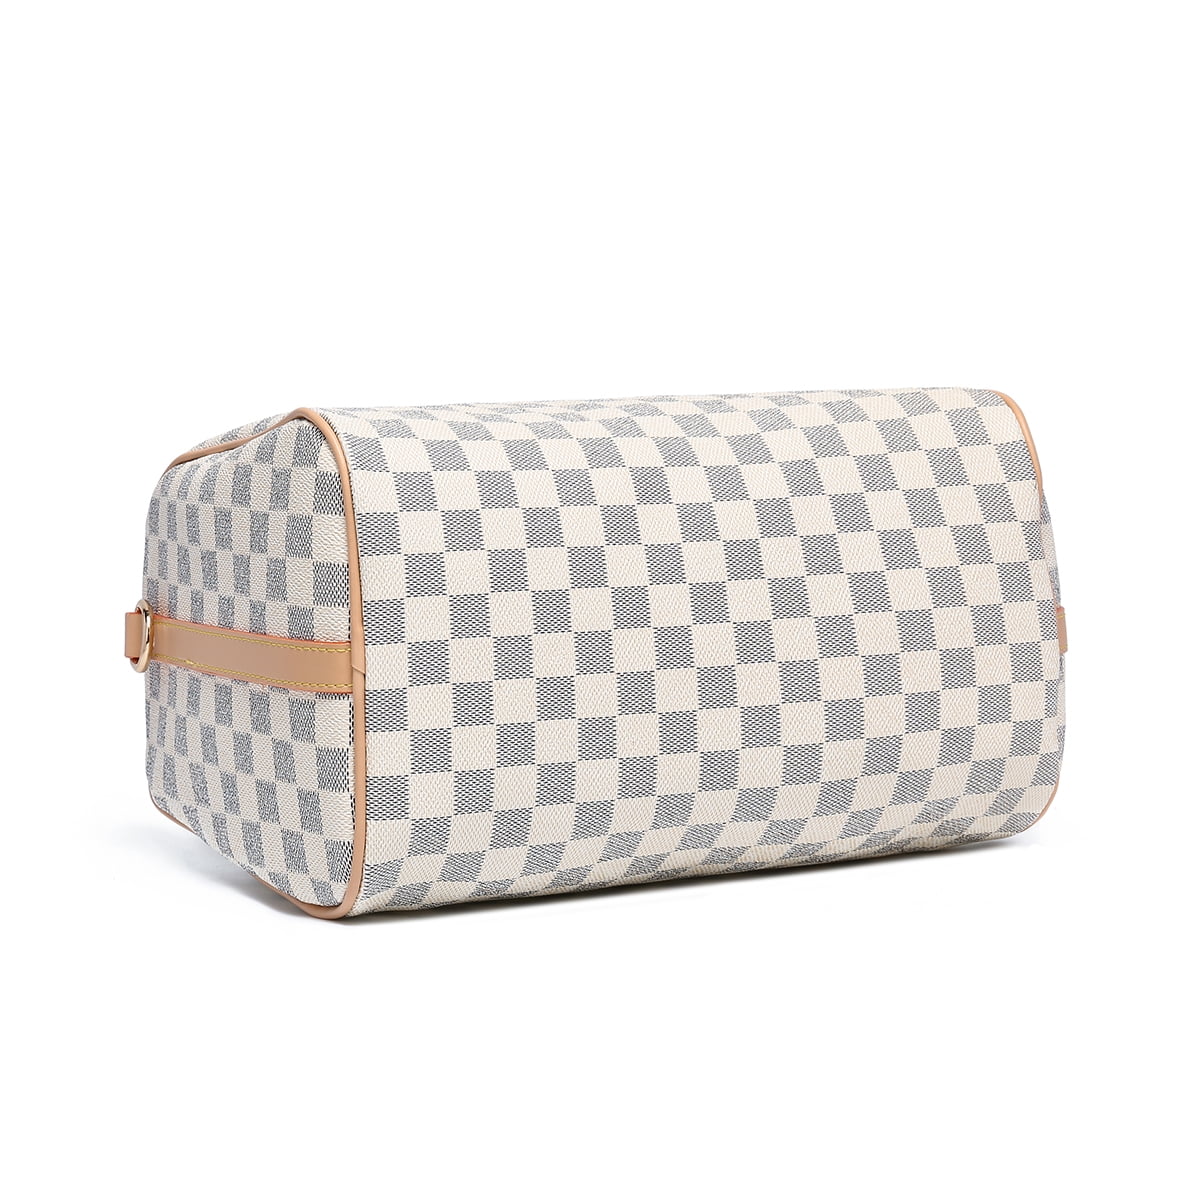 TWENTY FOUR White Checkered Handbags Leather Shoulder Bag and Wallet  Crossbody bag Ladies Handbags and Coin Purse 3pcs With Cross body Strap -  White2 